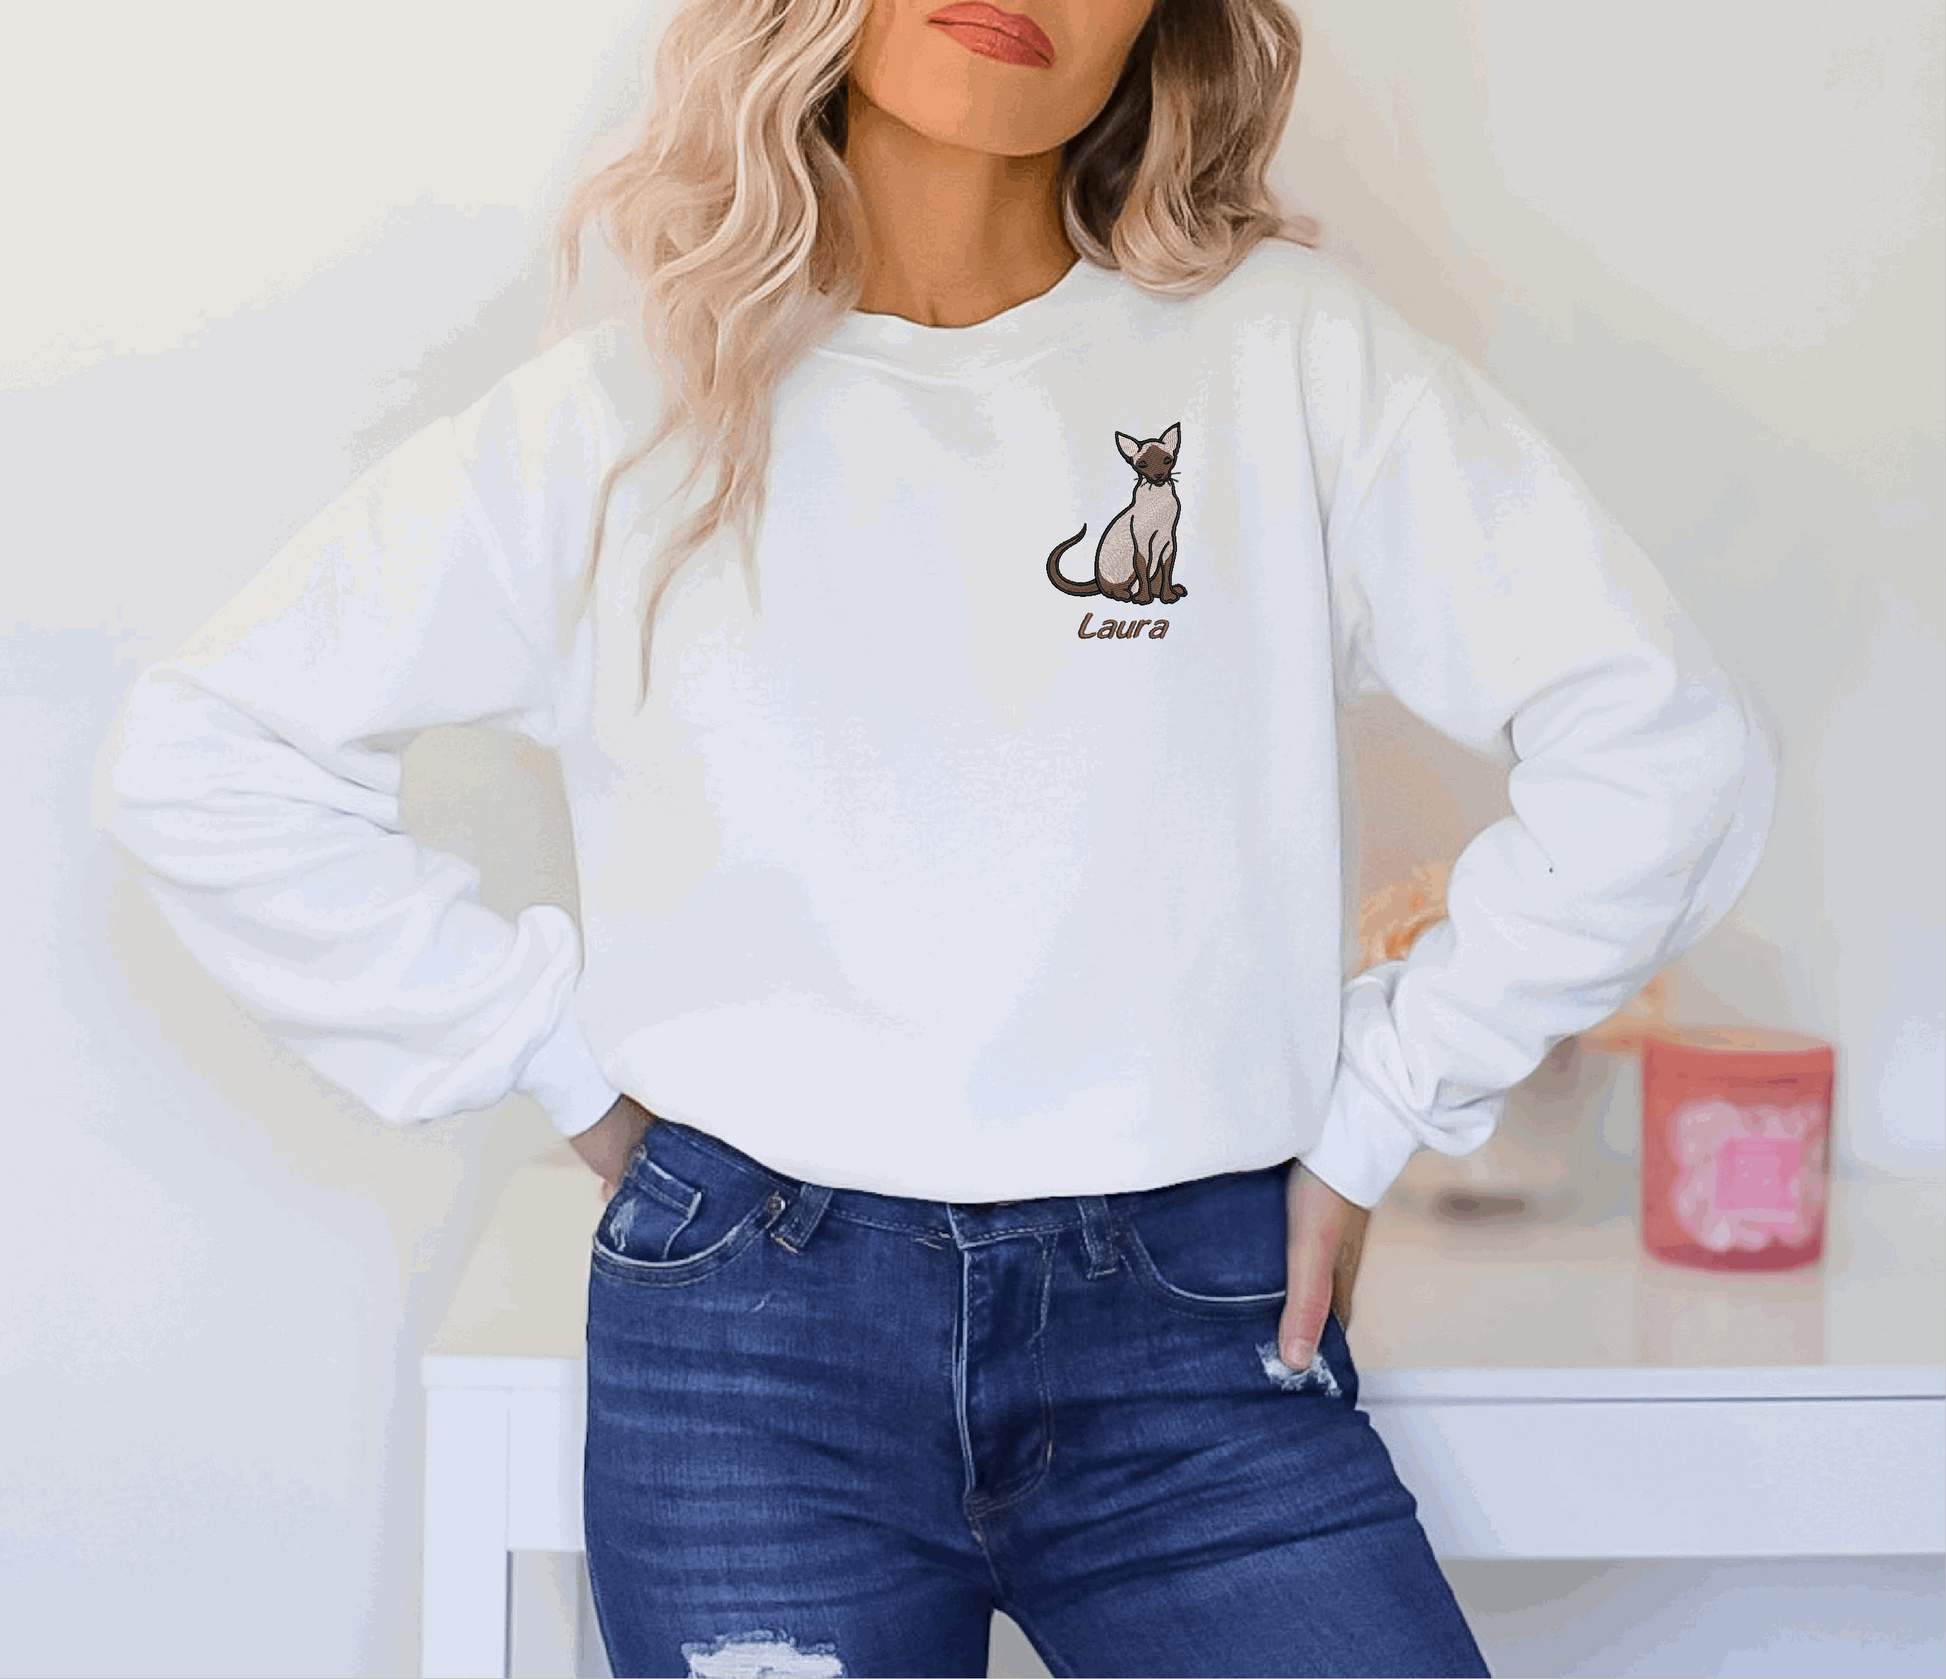 a woman wearing a white sweatshirt with a cat on it